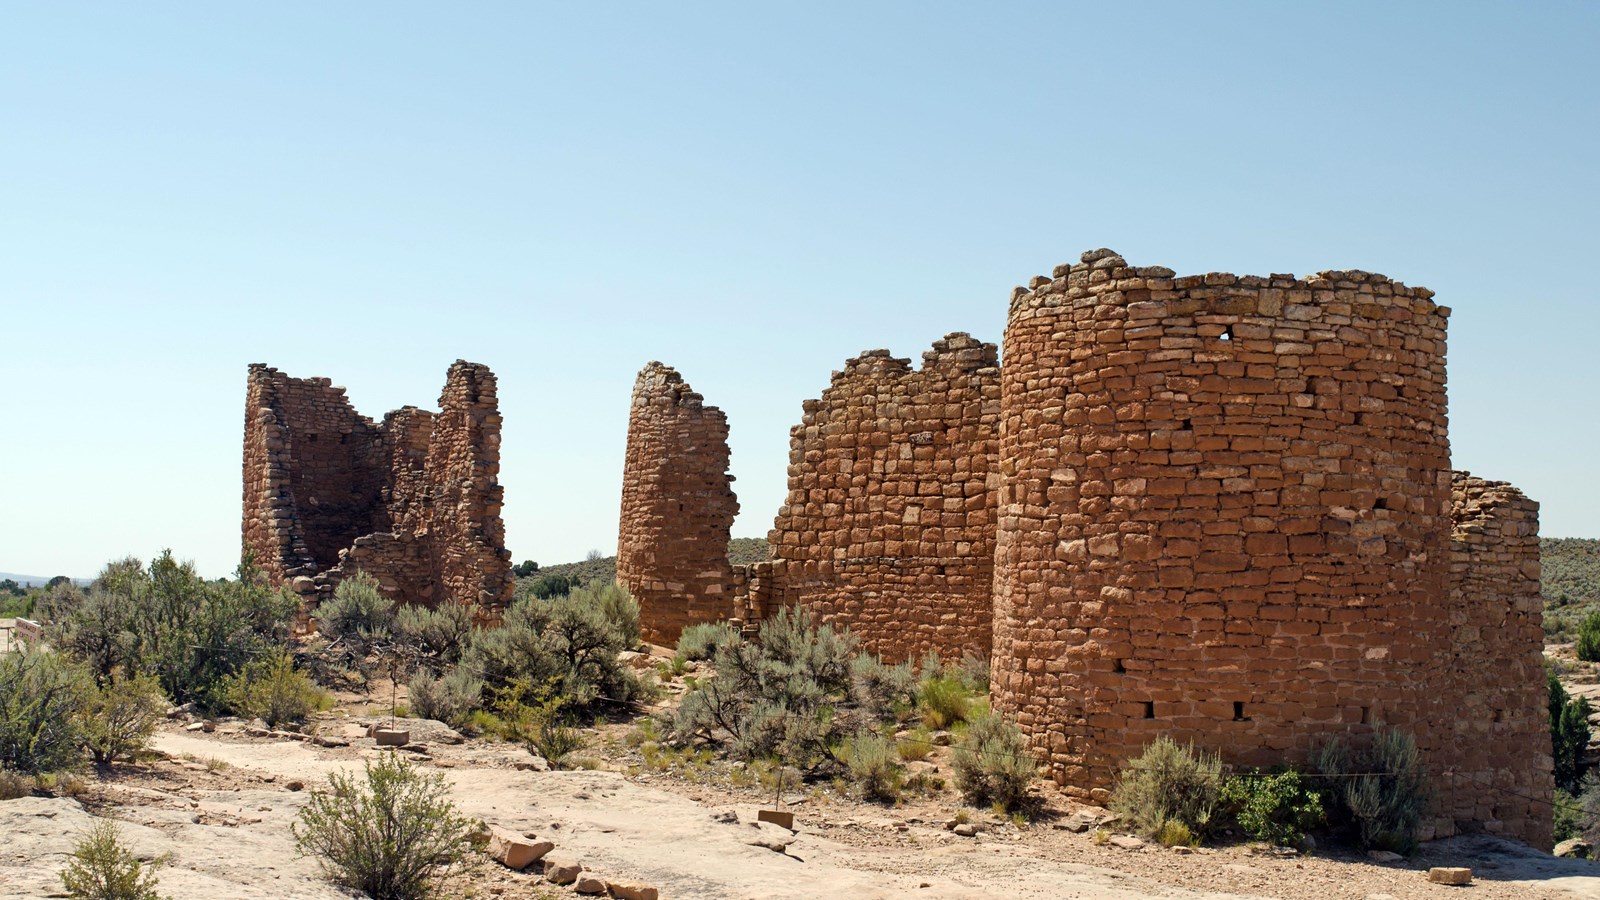 Remains of a large stone structure perched on the canyon rim.